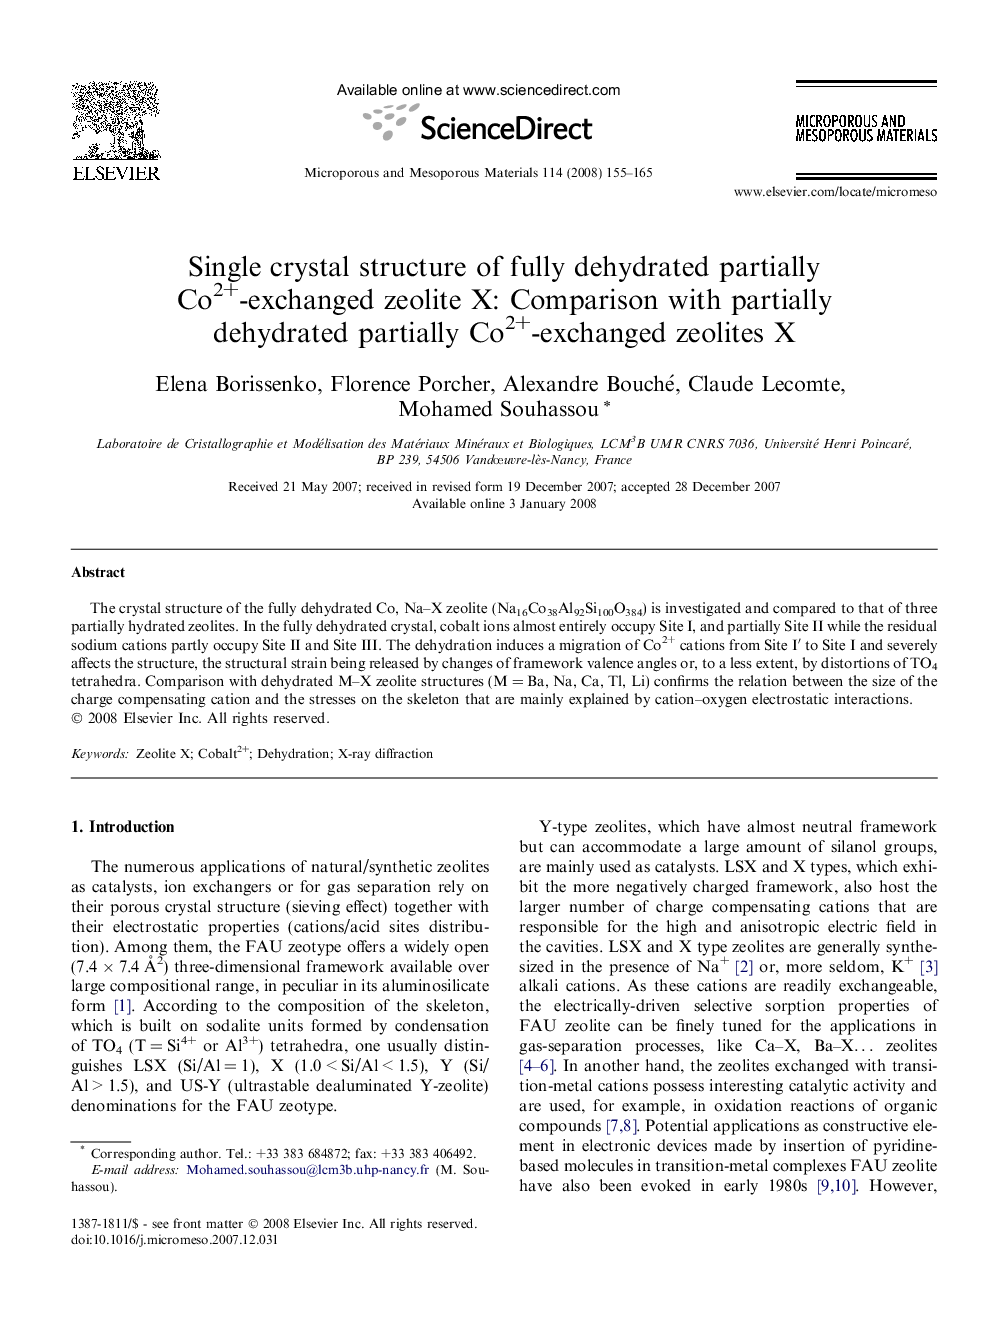 Single crystal structure of fully dehydrated partially Co2+-exchanged zeolite X: Comparison with partially dehydrated partially Co2+-exchanged zeolites X